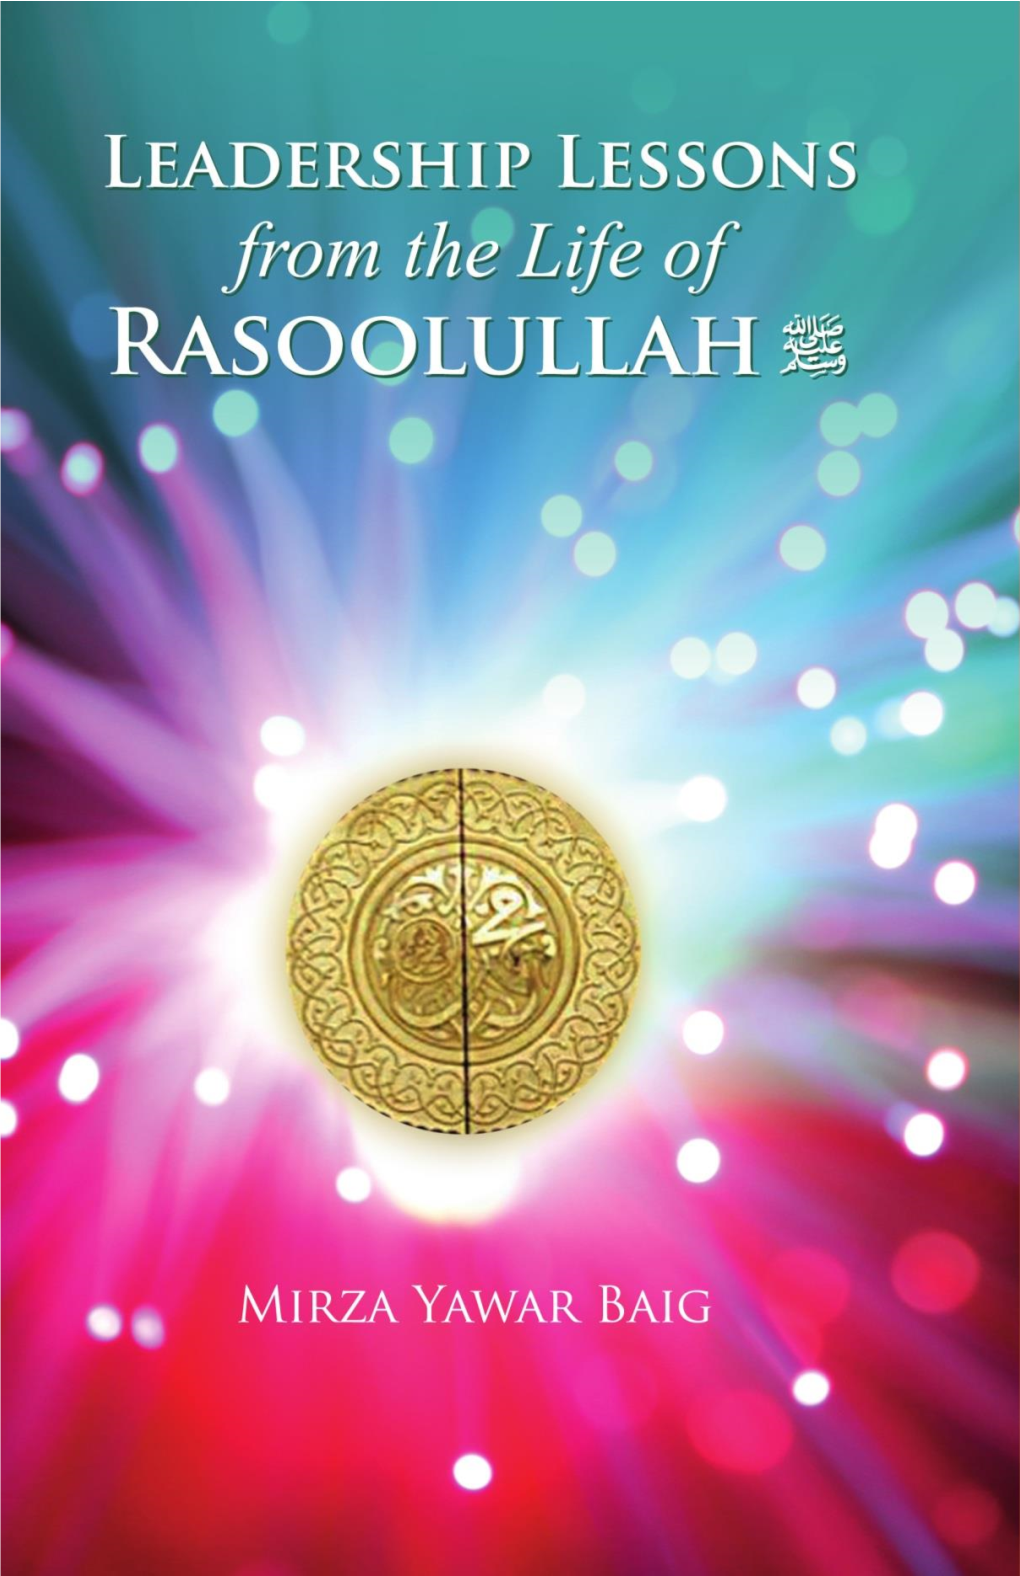 Leadership Lessons from the Life of Rasoolullah